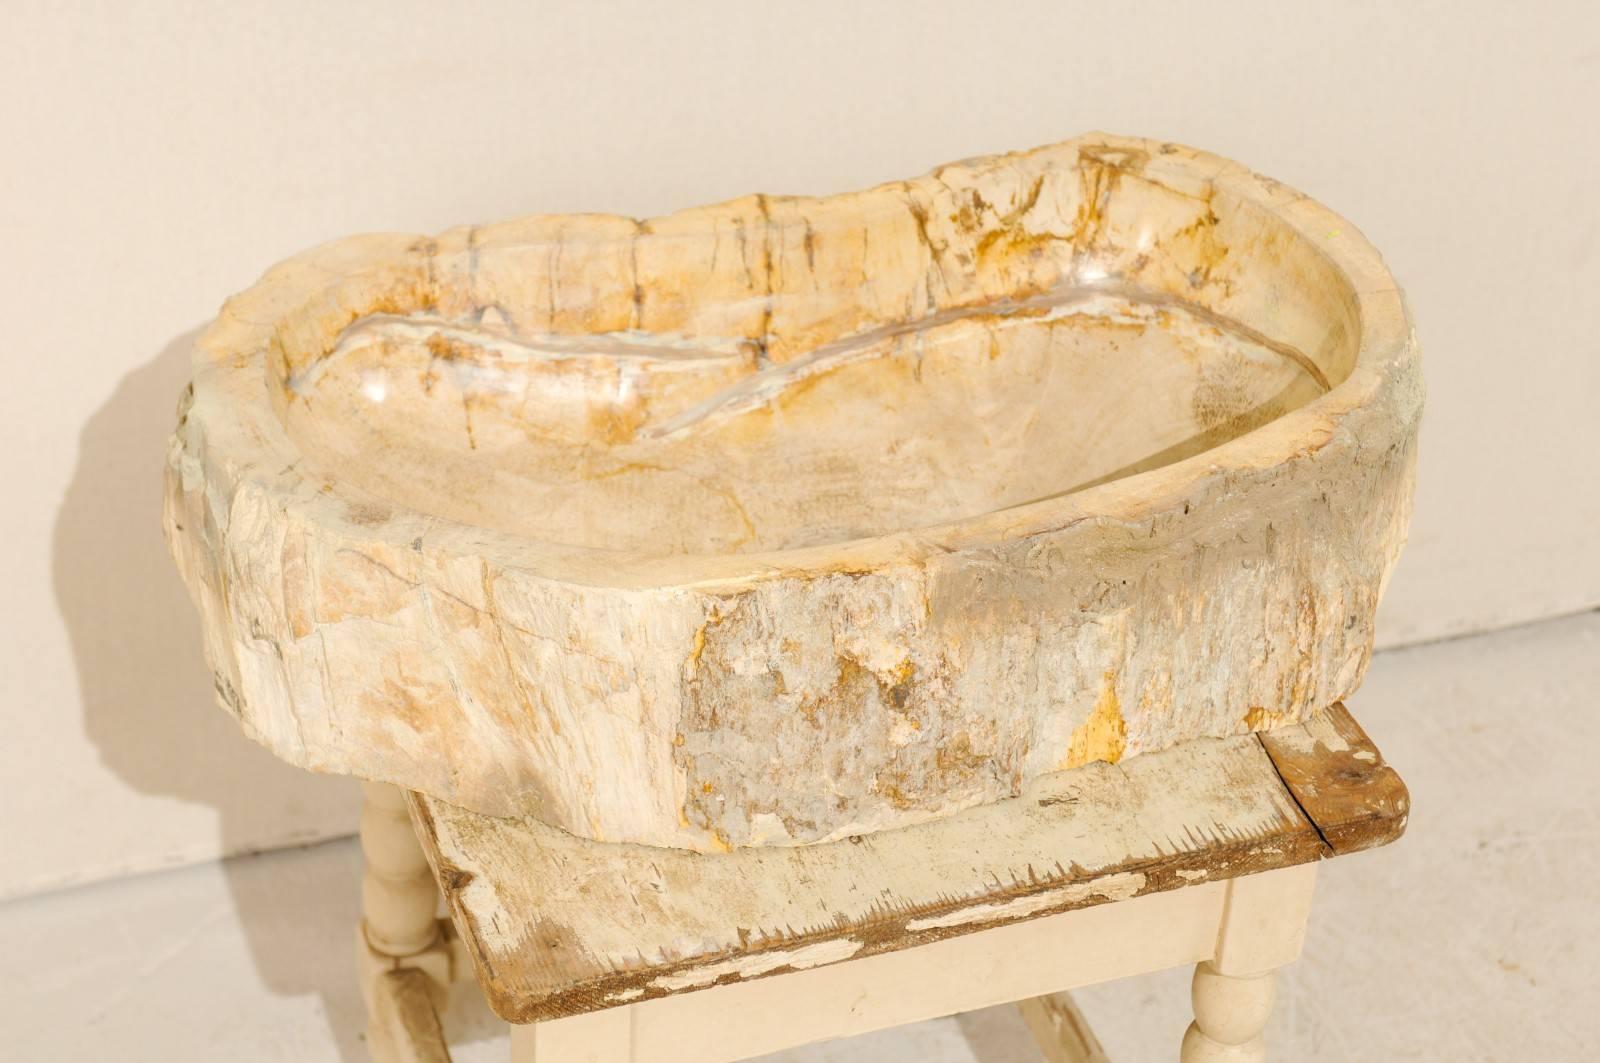 A cream and beige color petrified wood sink. This petrified wood sink features a kidney bean shape. The sink is primarily cream and beige with some warmer brown veining and spots throughout. The interior of the sink has been polished and the